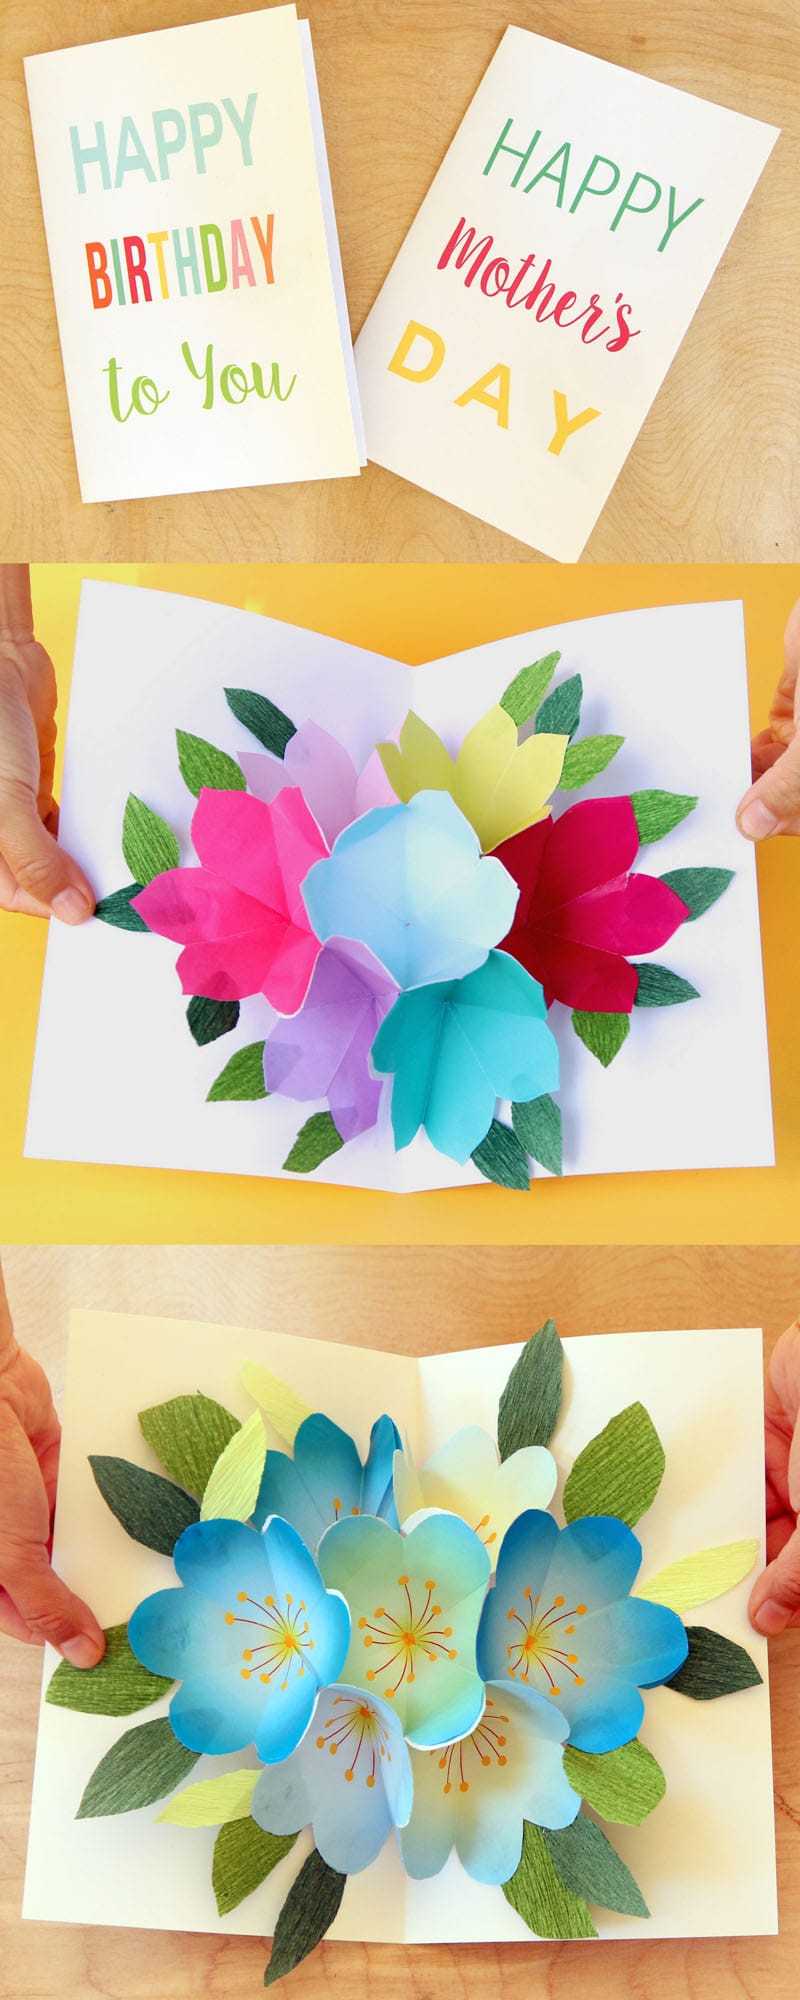 Free Printable Happy Birthday Card With Pop Up Bouquet – A Pertaining To Free Printable Pop Up Card Templates